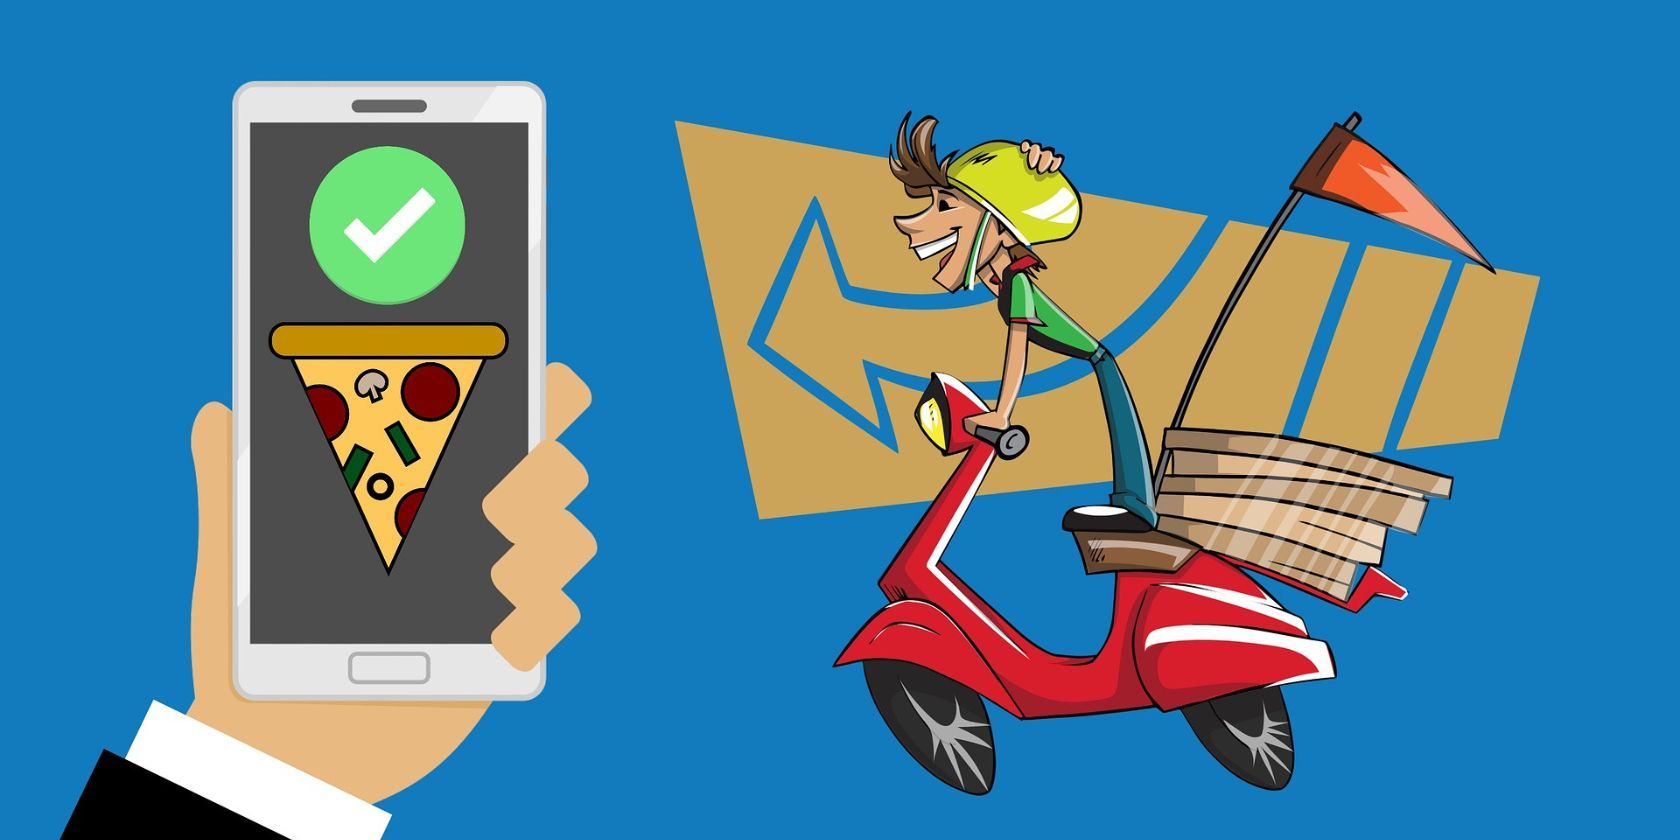 Pizza Delivery through Food Delivery Application